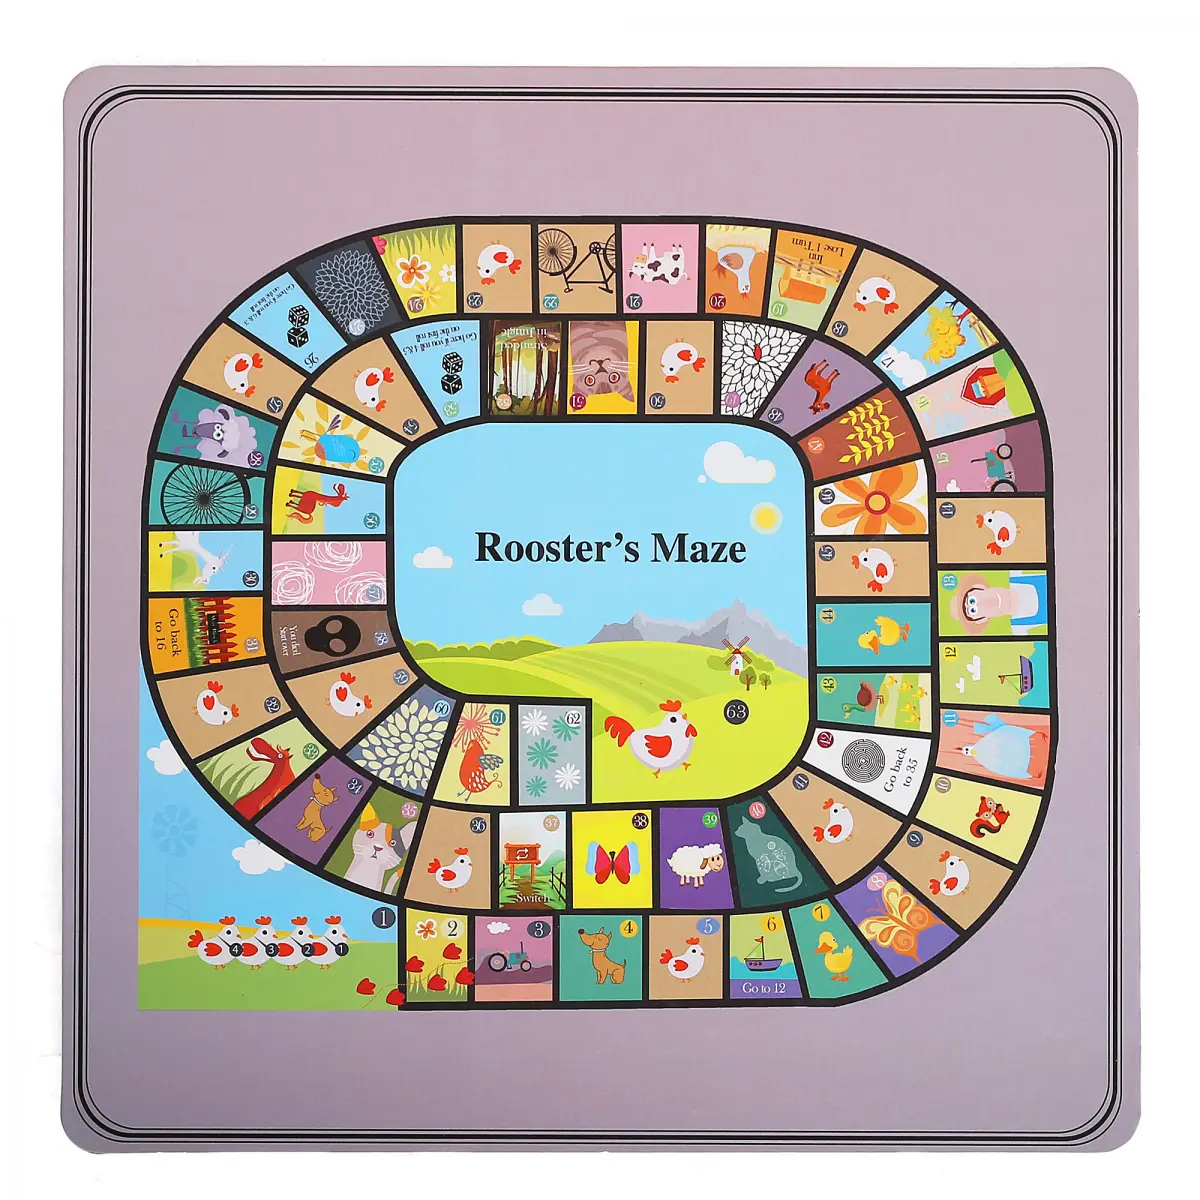 Youreka 101 Family Games, Games & Puzzles for Kids, 6Y+, Multicolour